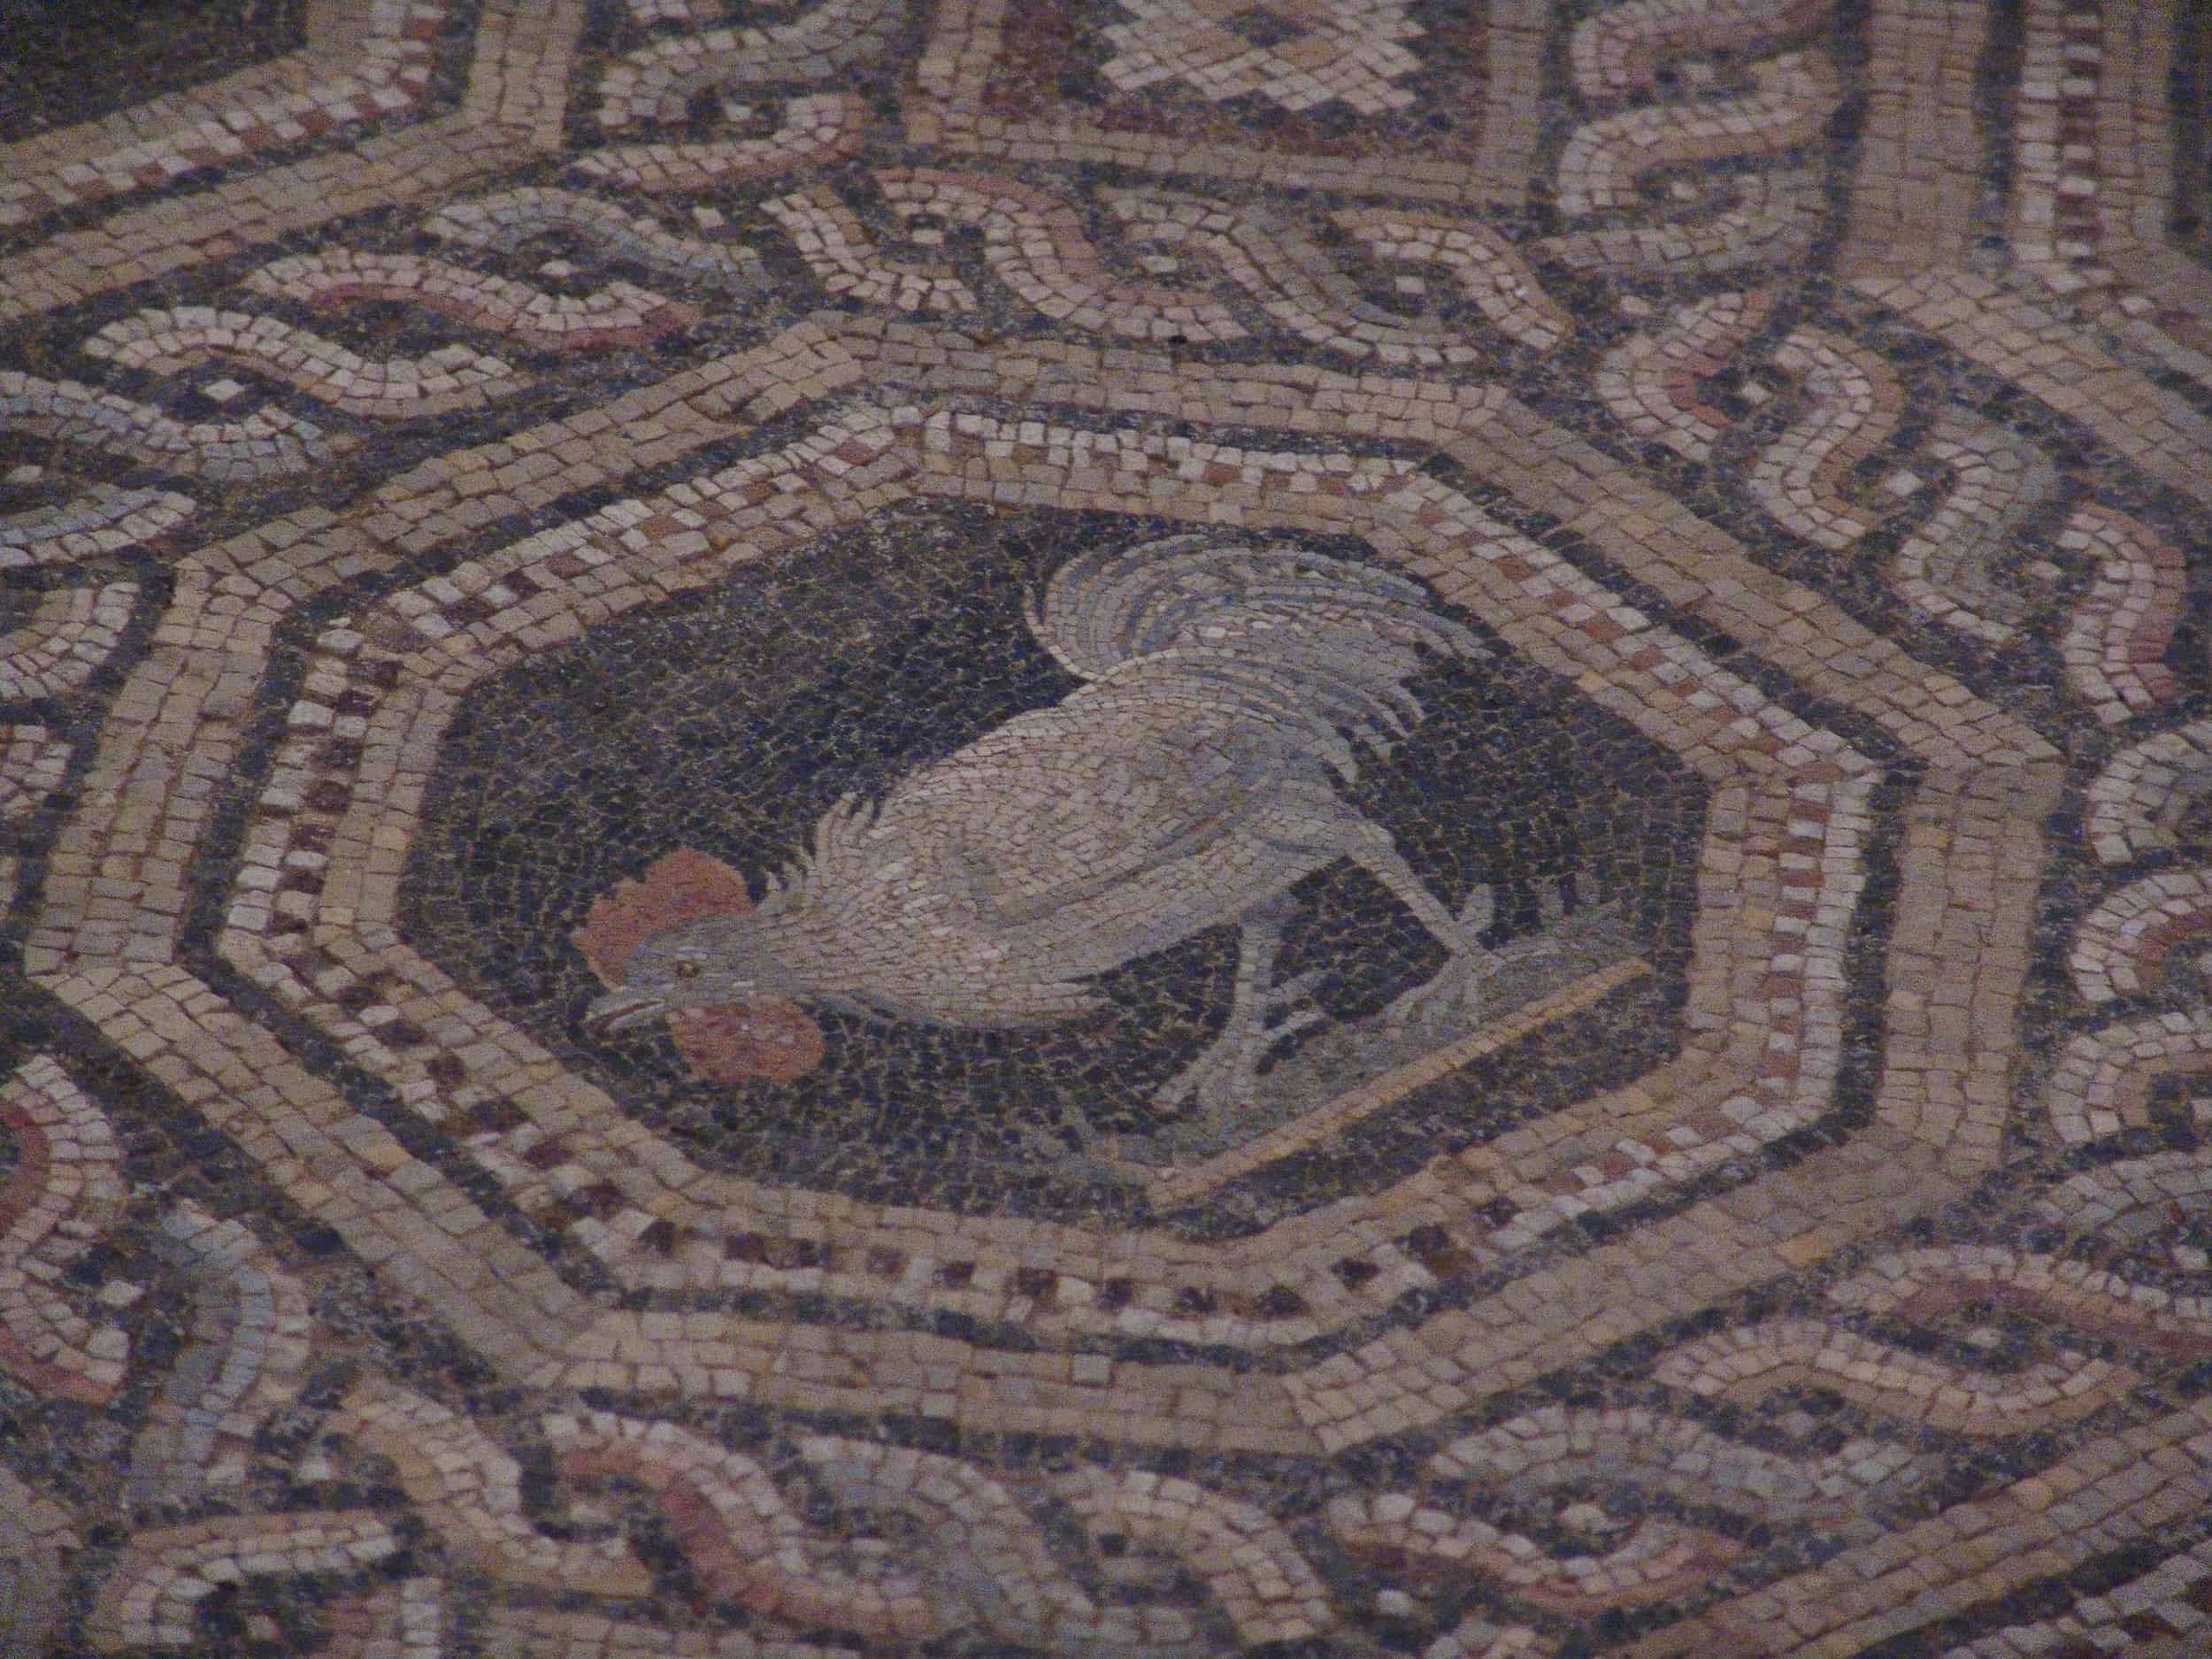 White rooster on a mosaic floor of Building Z